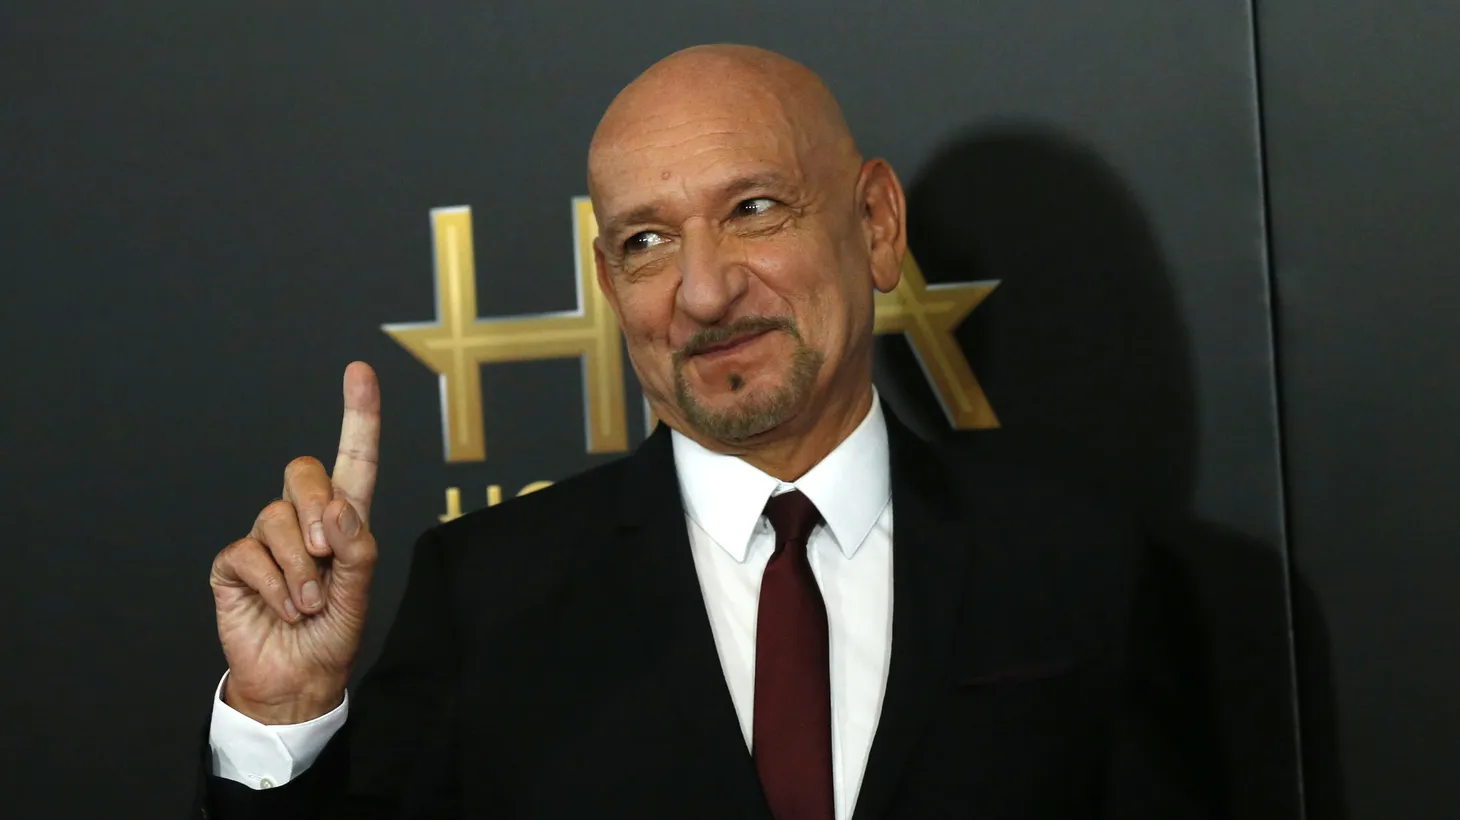 Sir Ben Kingsley believes that circles in life are patterns, coincidences happen all the time, and we should pay attention.